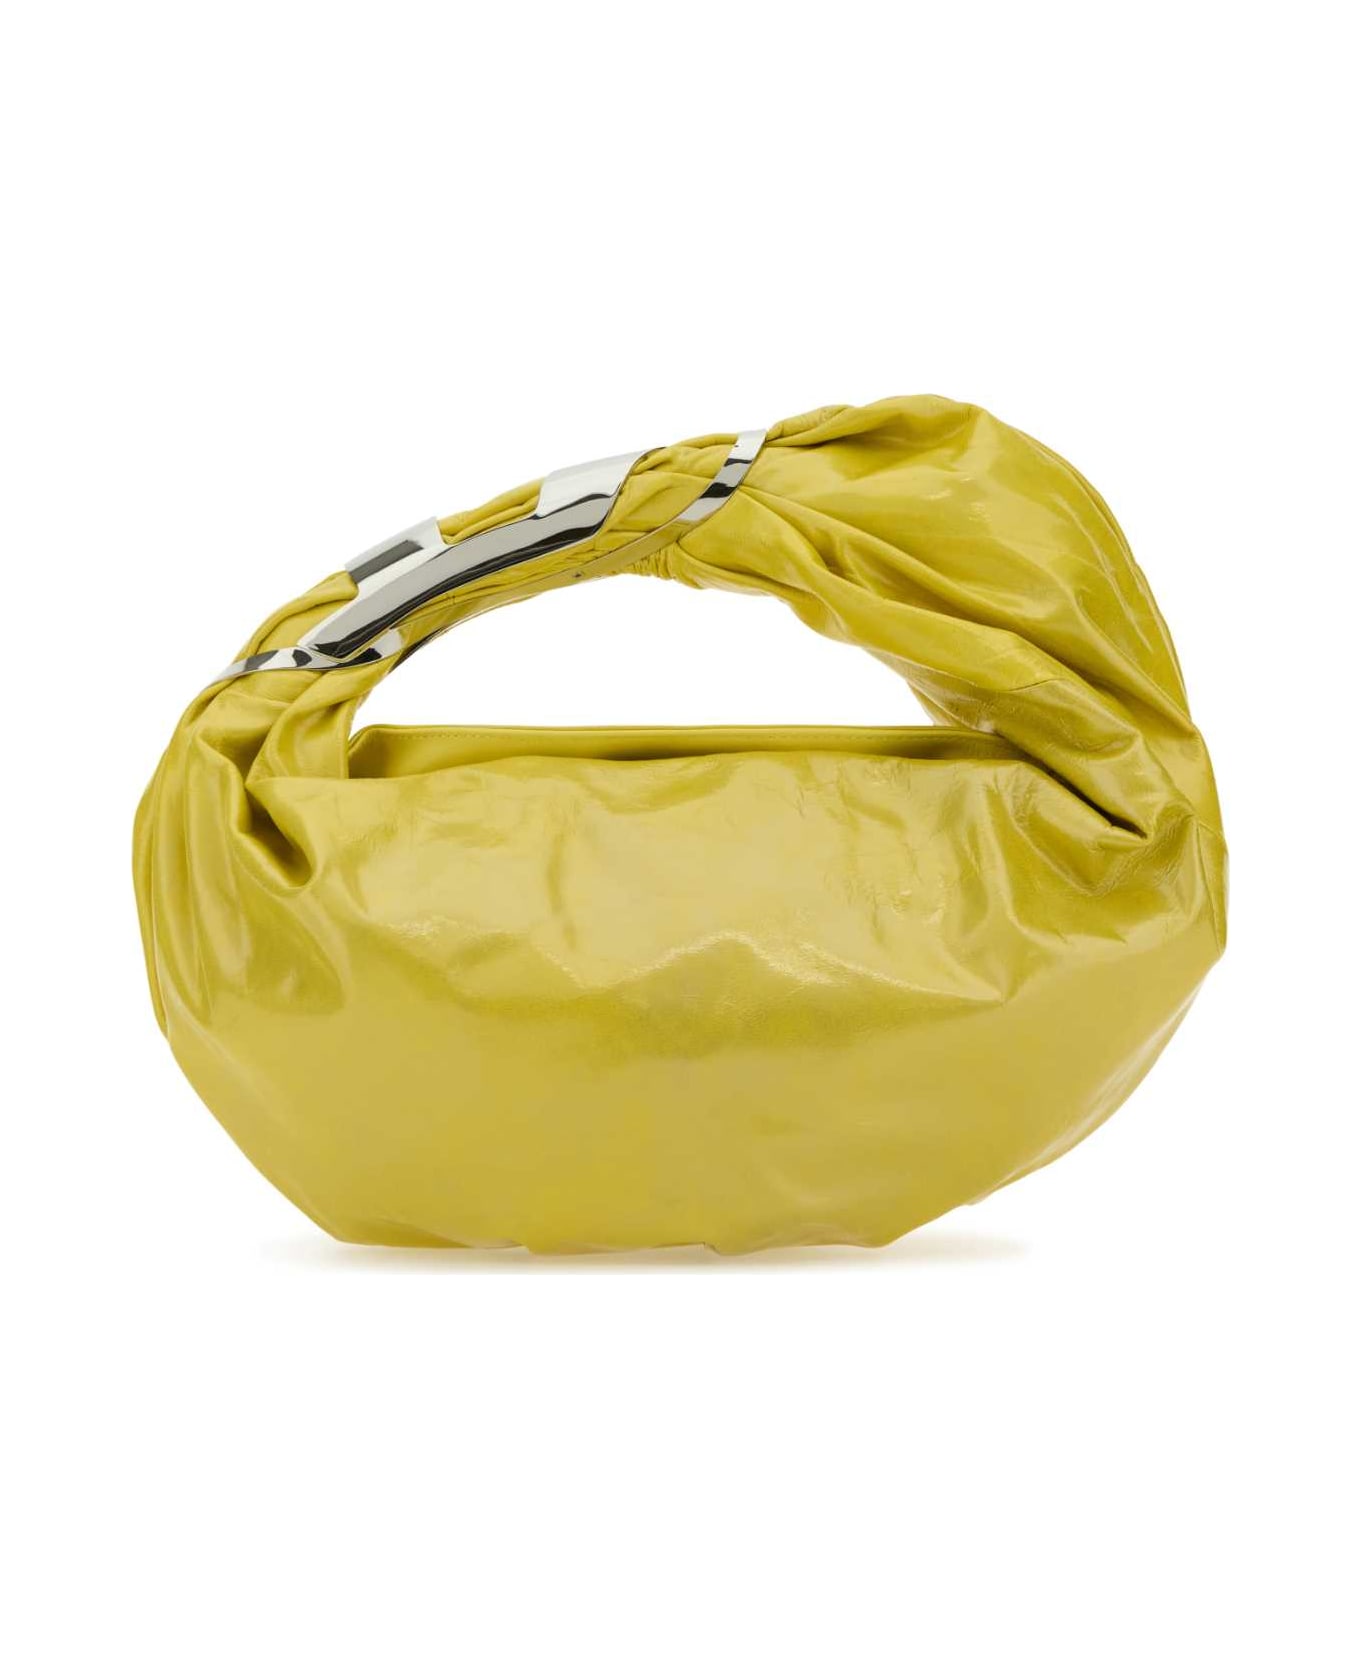 Diesel Yellow Leather Grab-d Hobo Shopping Bag - H6309